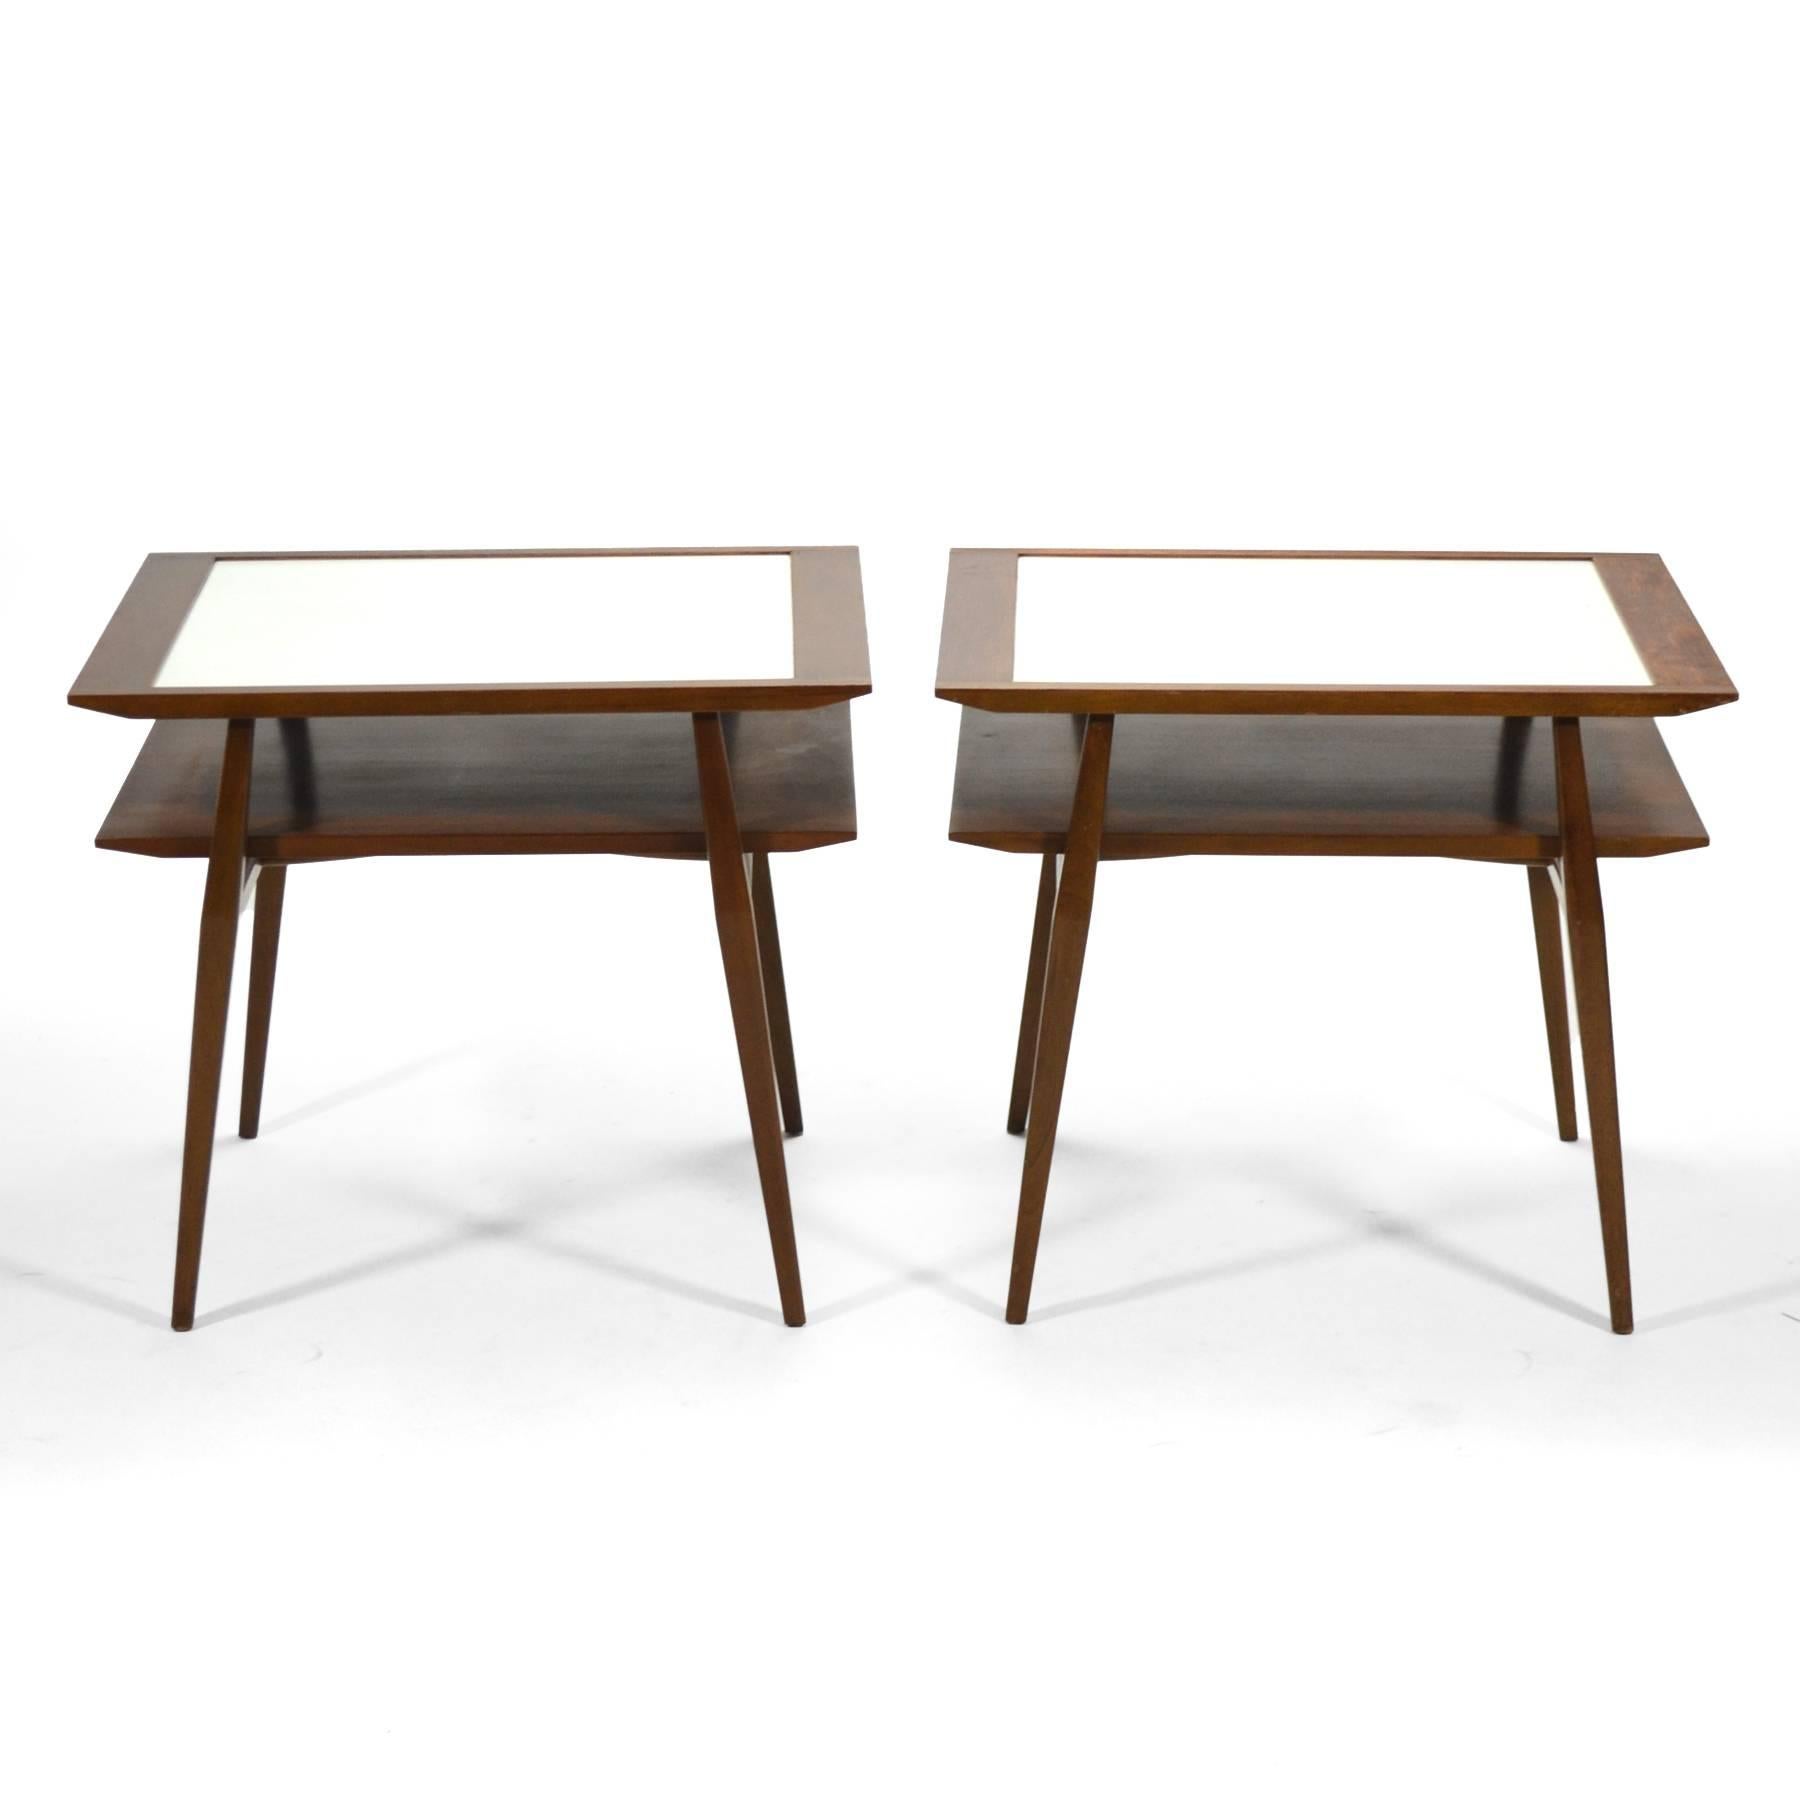 Mid-20th Century Bertha Schaefer Pair of End Tables by Singer & Sons